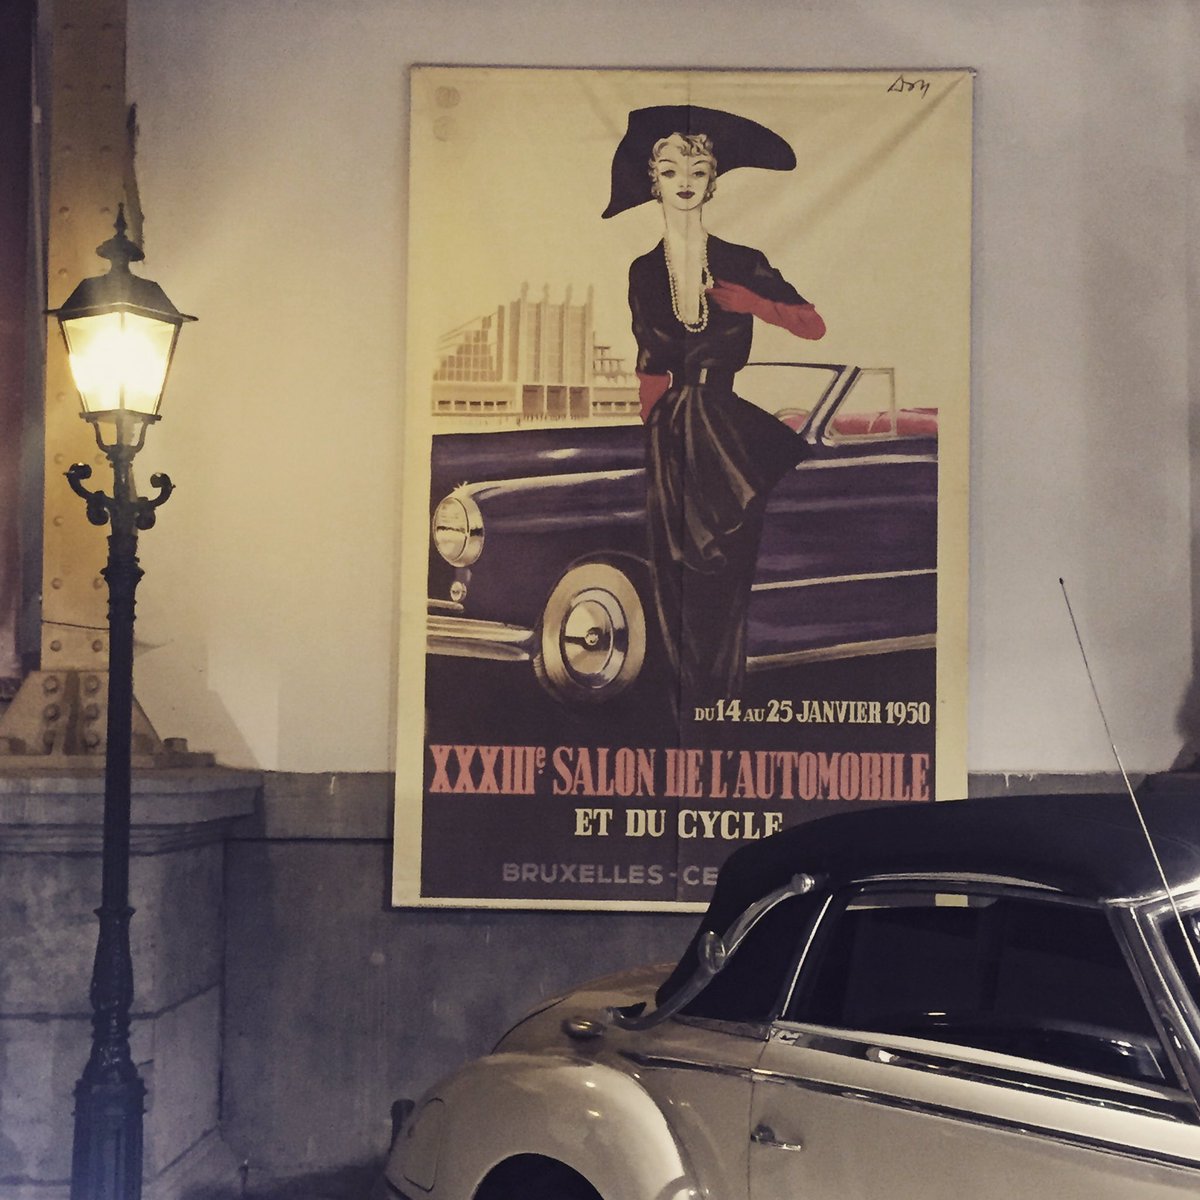 They sure did know how to advertise for the @AutoSalonBe in the fifties! #stylish #vintage #autoworld #museum @AutoworldBxl